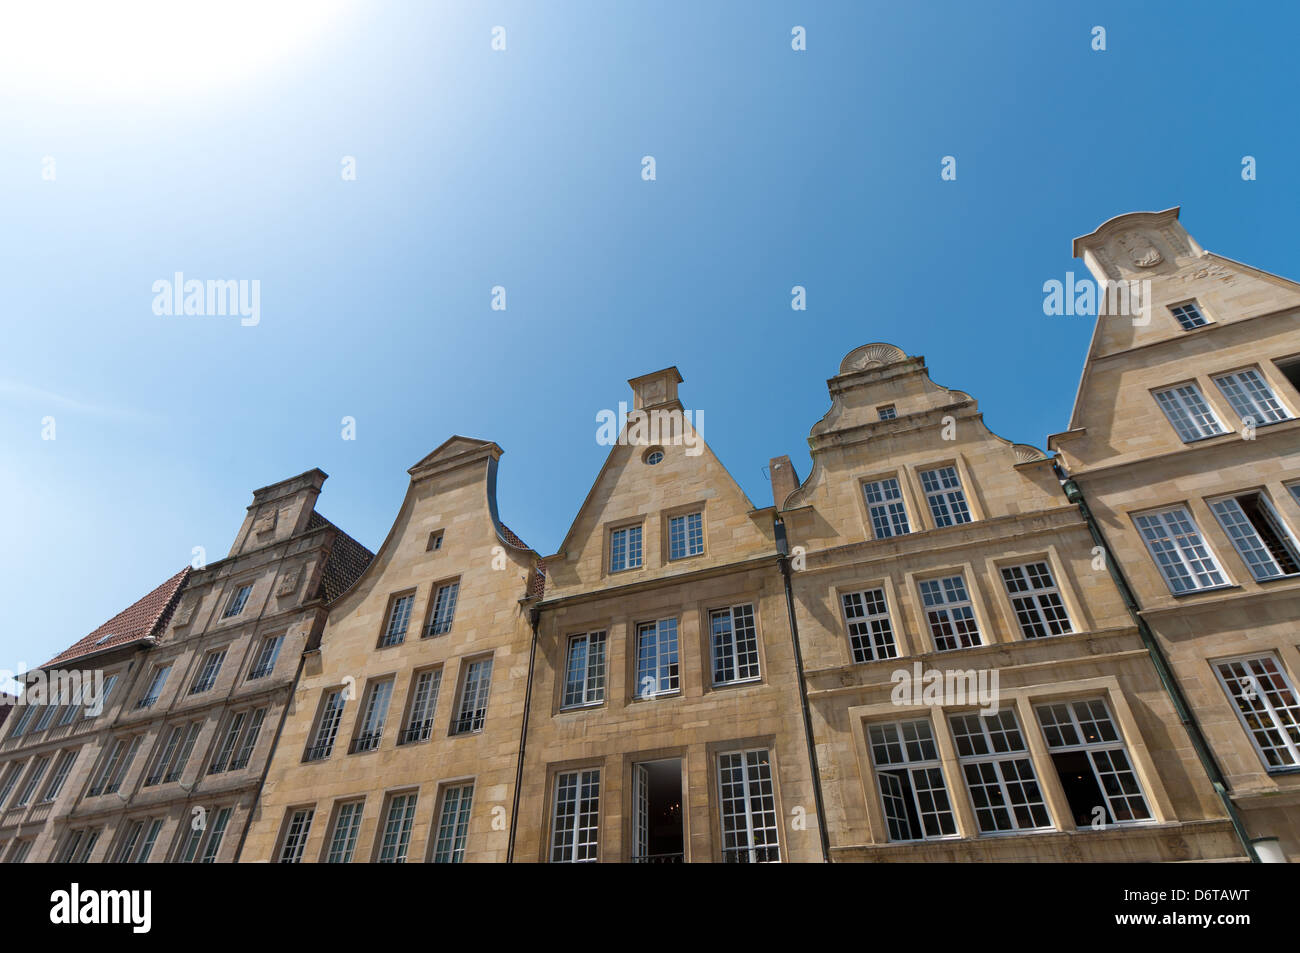 old monumental facades at the famous Prinzipalmarkt in Munster, Germany Stock Photo